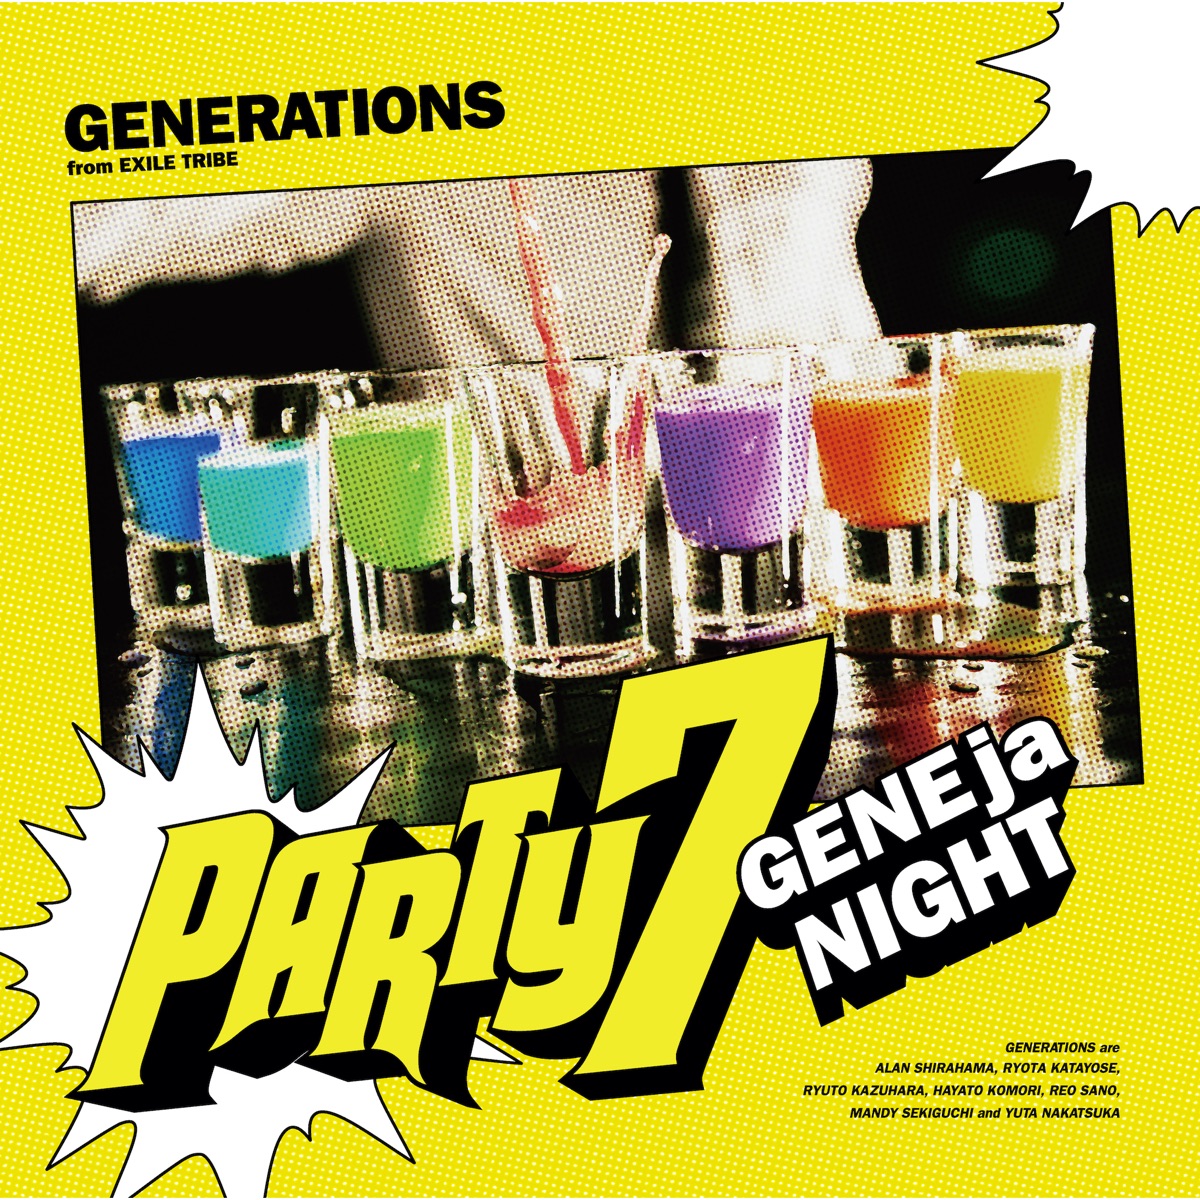 Cover art for『GENERATIONS from EXILE TRIBE - PARTY7 ～GENEjaNIGHT～』from the release『PARTY7 ～GENEjaNIGHT～